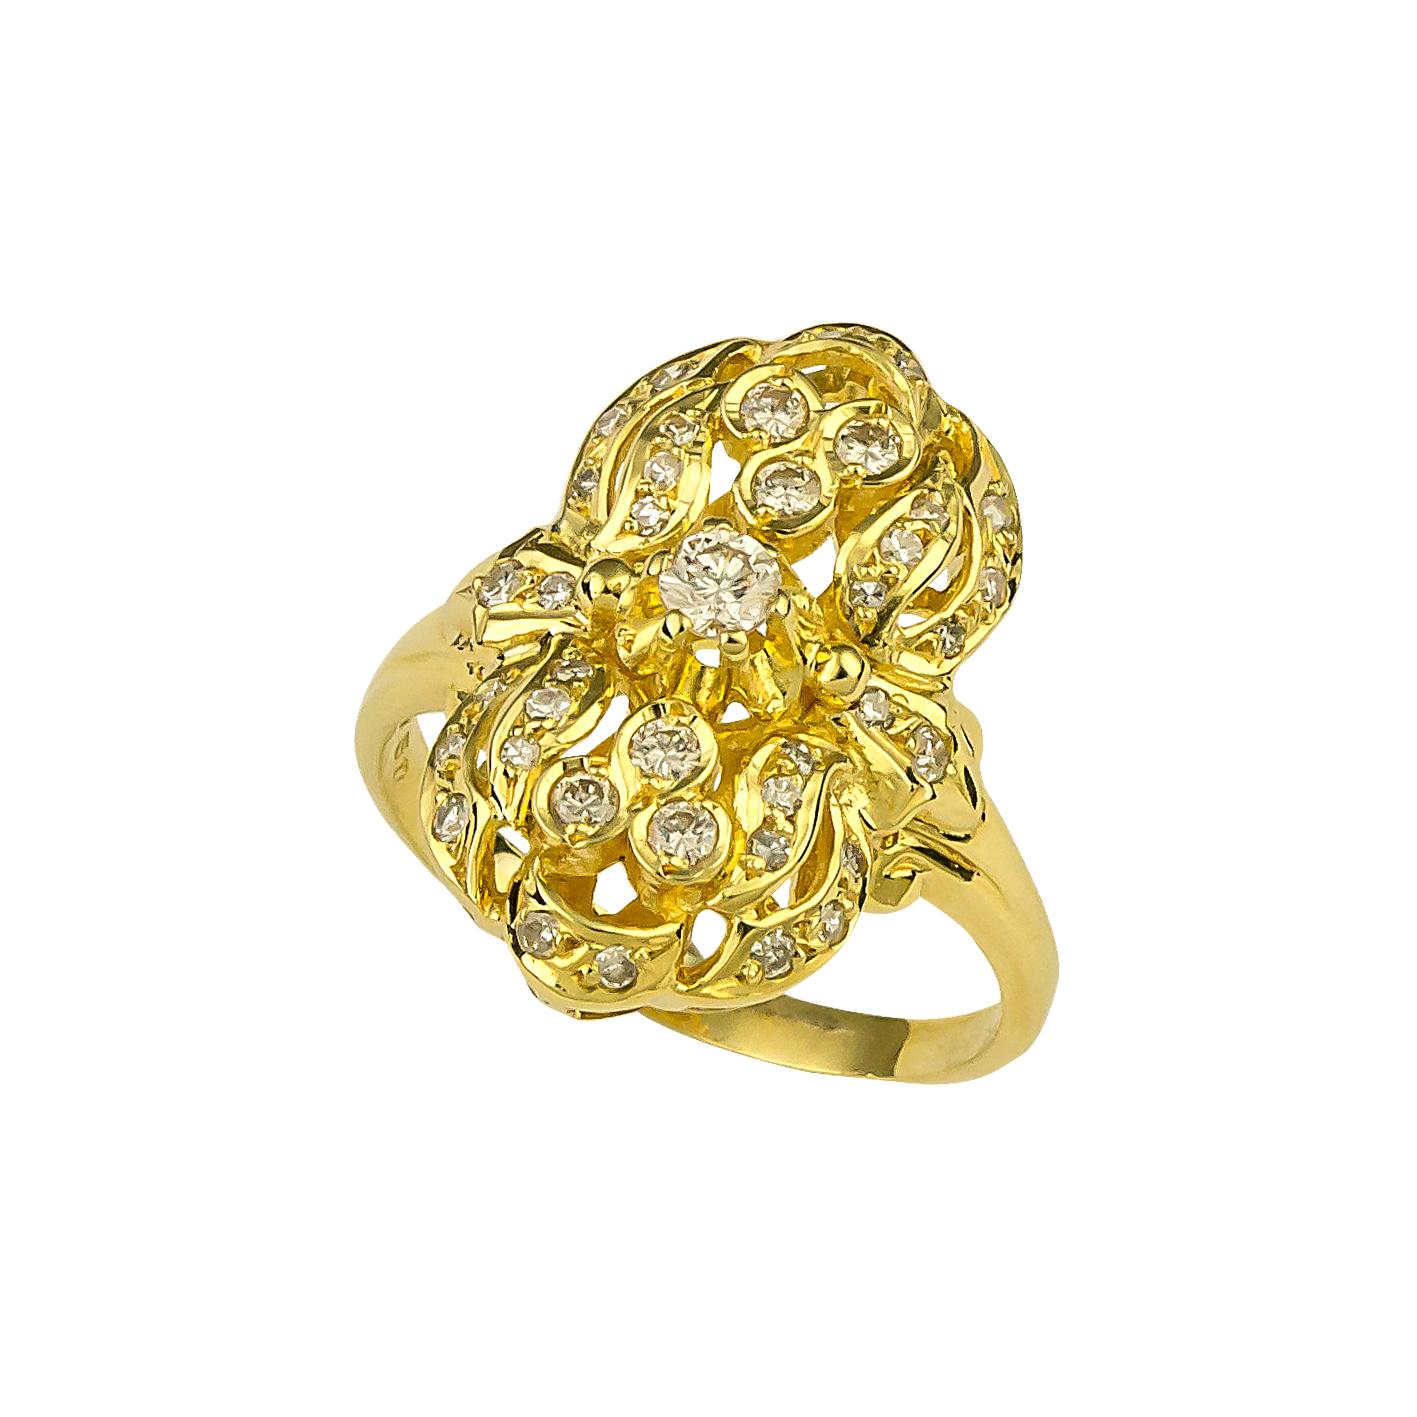 S.Georgios Hand Made 18 Karat Yellow Gold Ring decorated with Byzantine-style workmanship and features Brilliant cut Diamonds total weight of 0,56 Carat. We also make this beautiful design in White or Rose Gold, and with different stone selections,